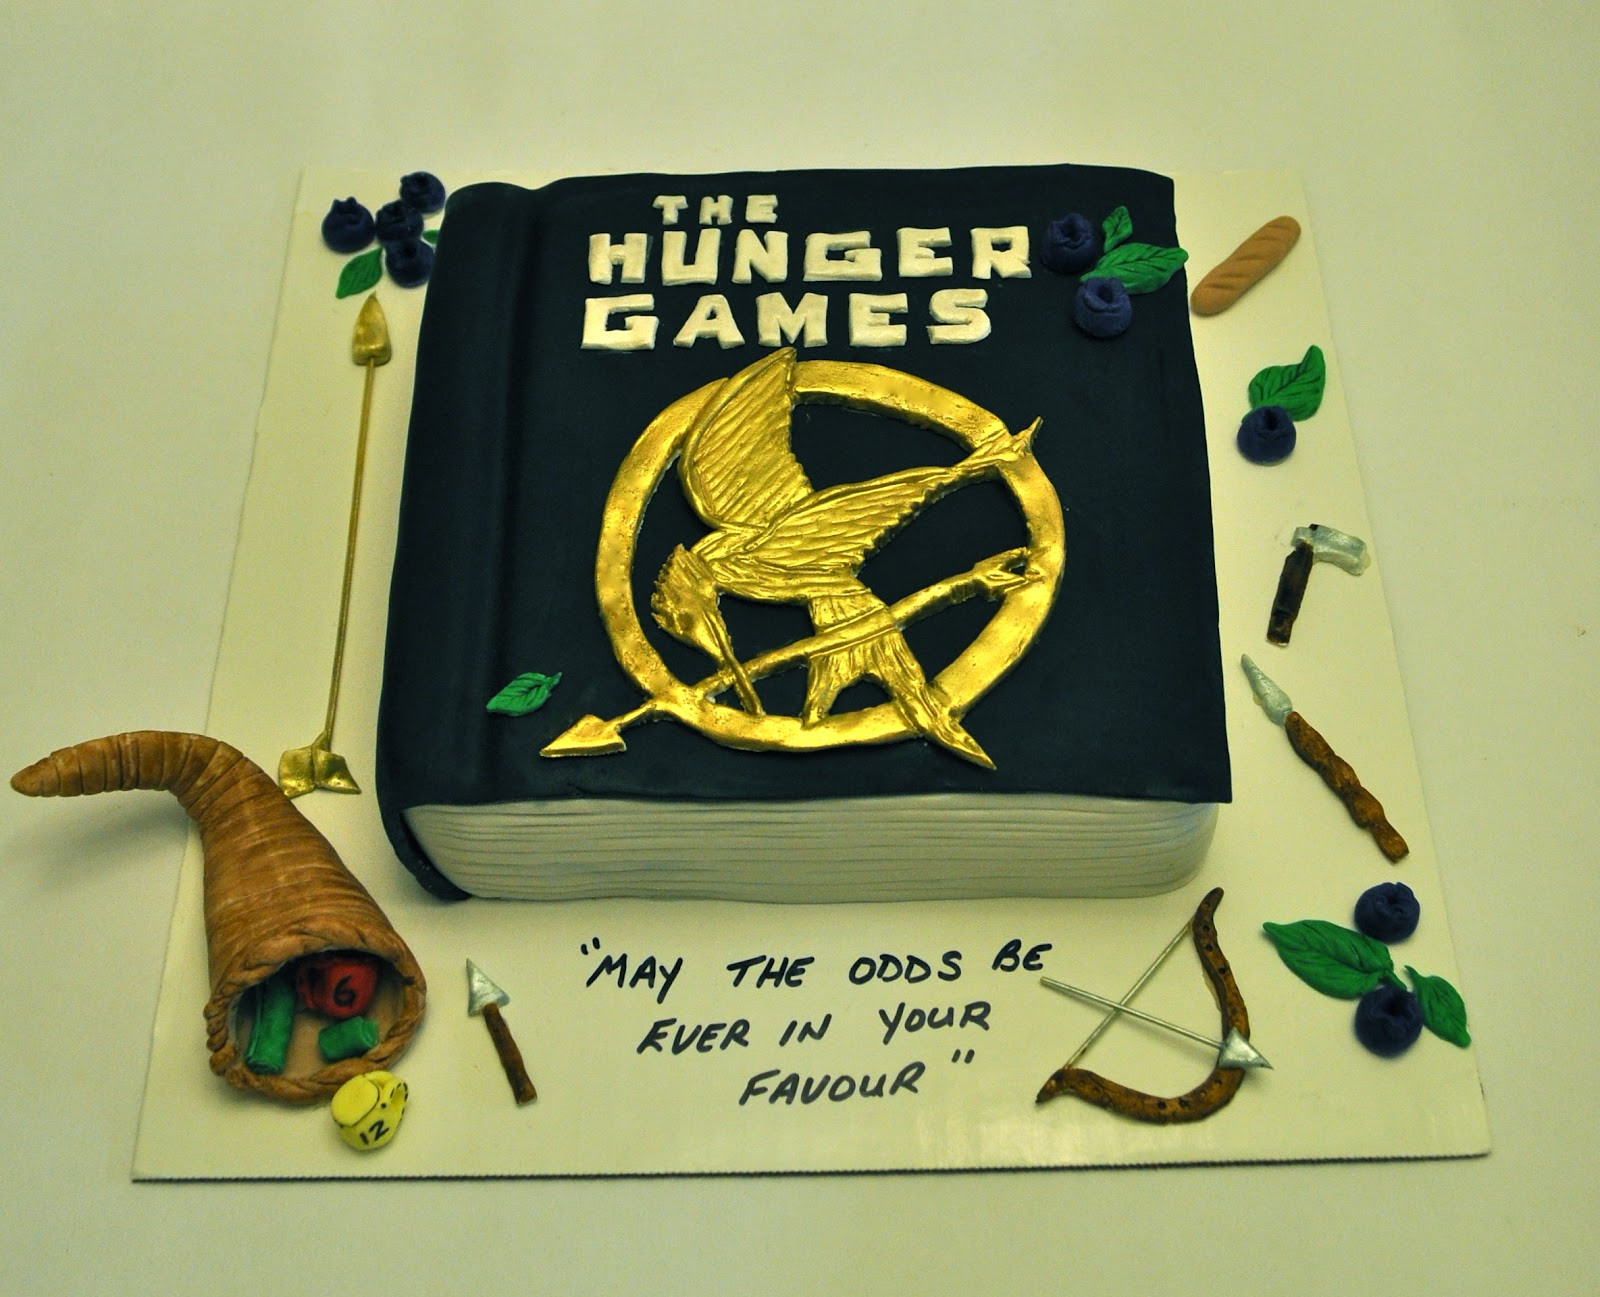 Hunger Games Birthday Cake
 Cakes by Setia The Hunger Games cake